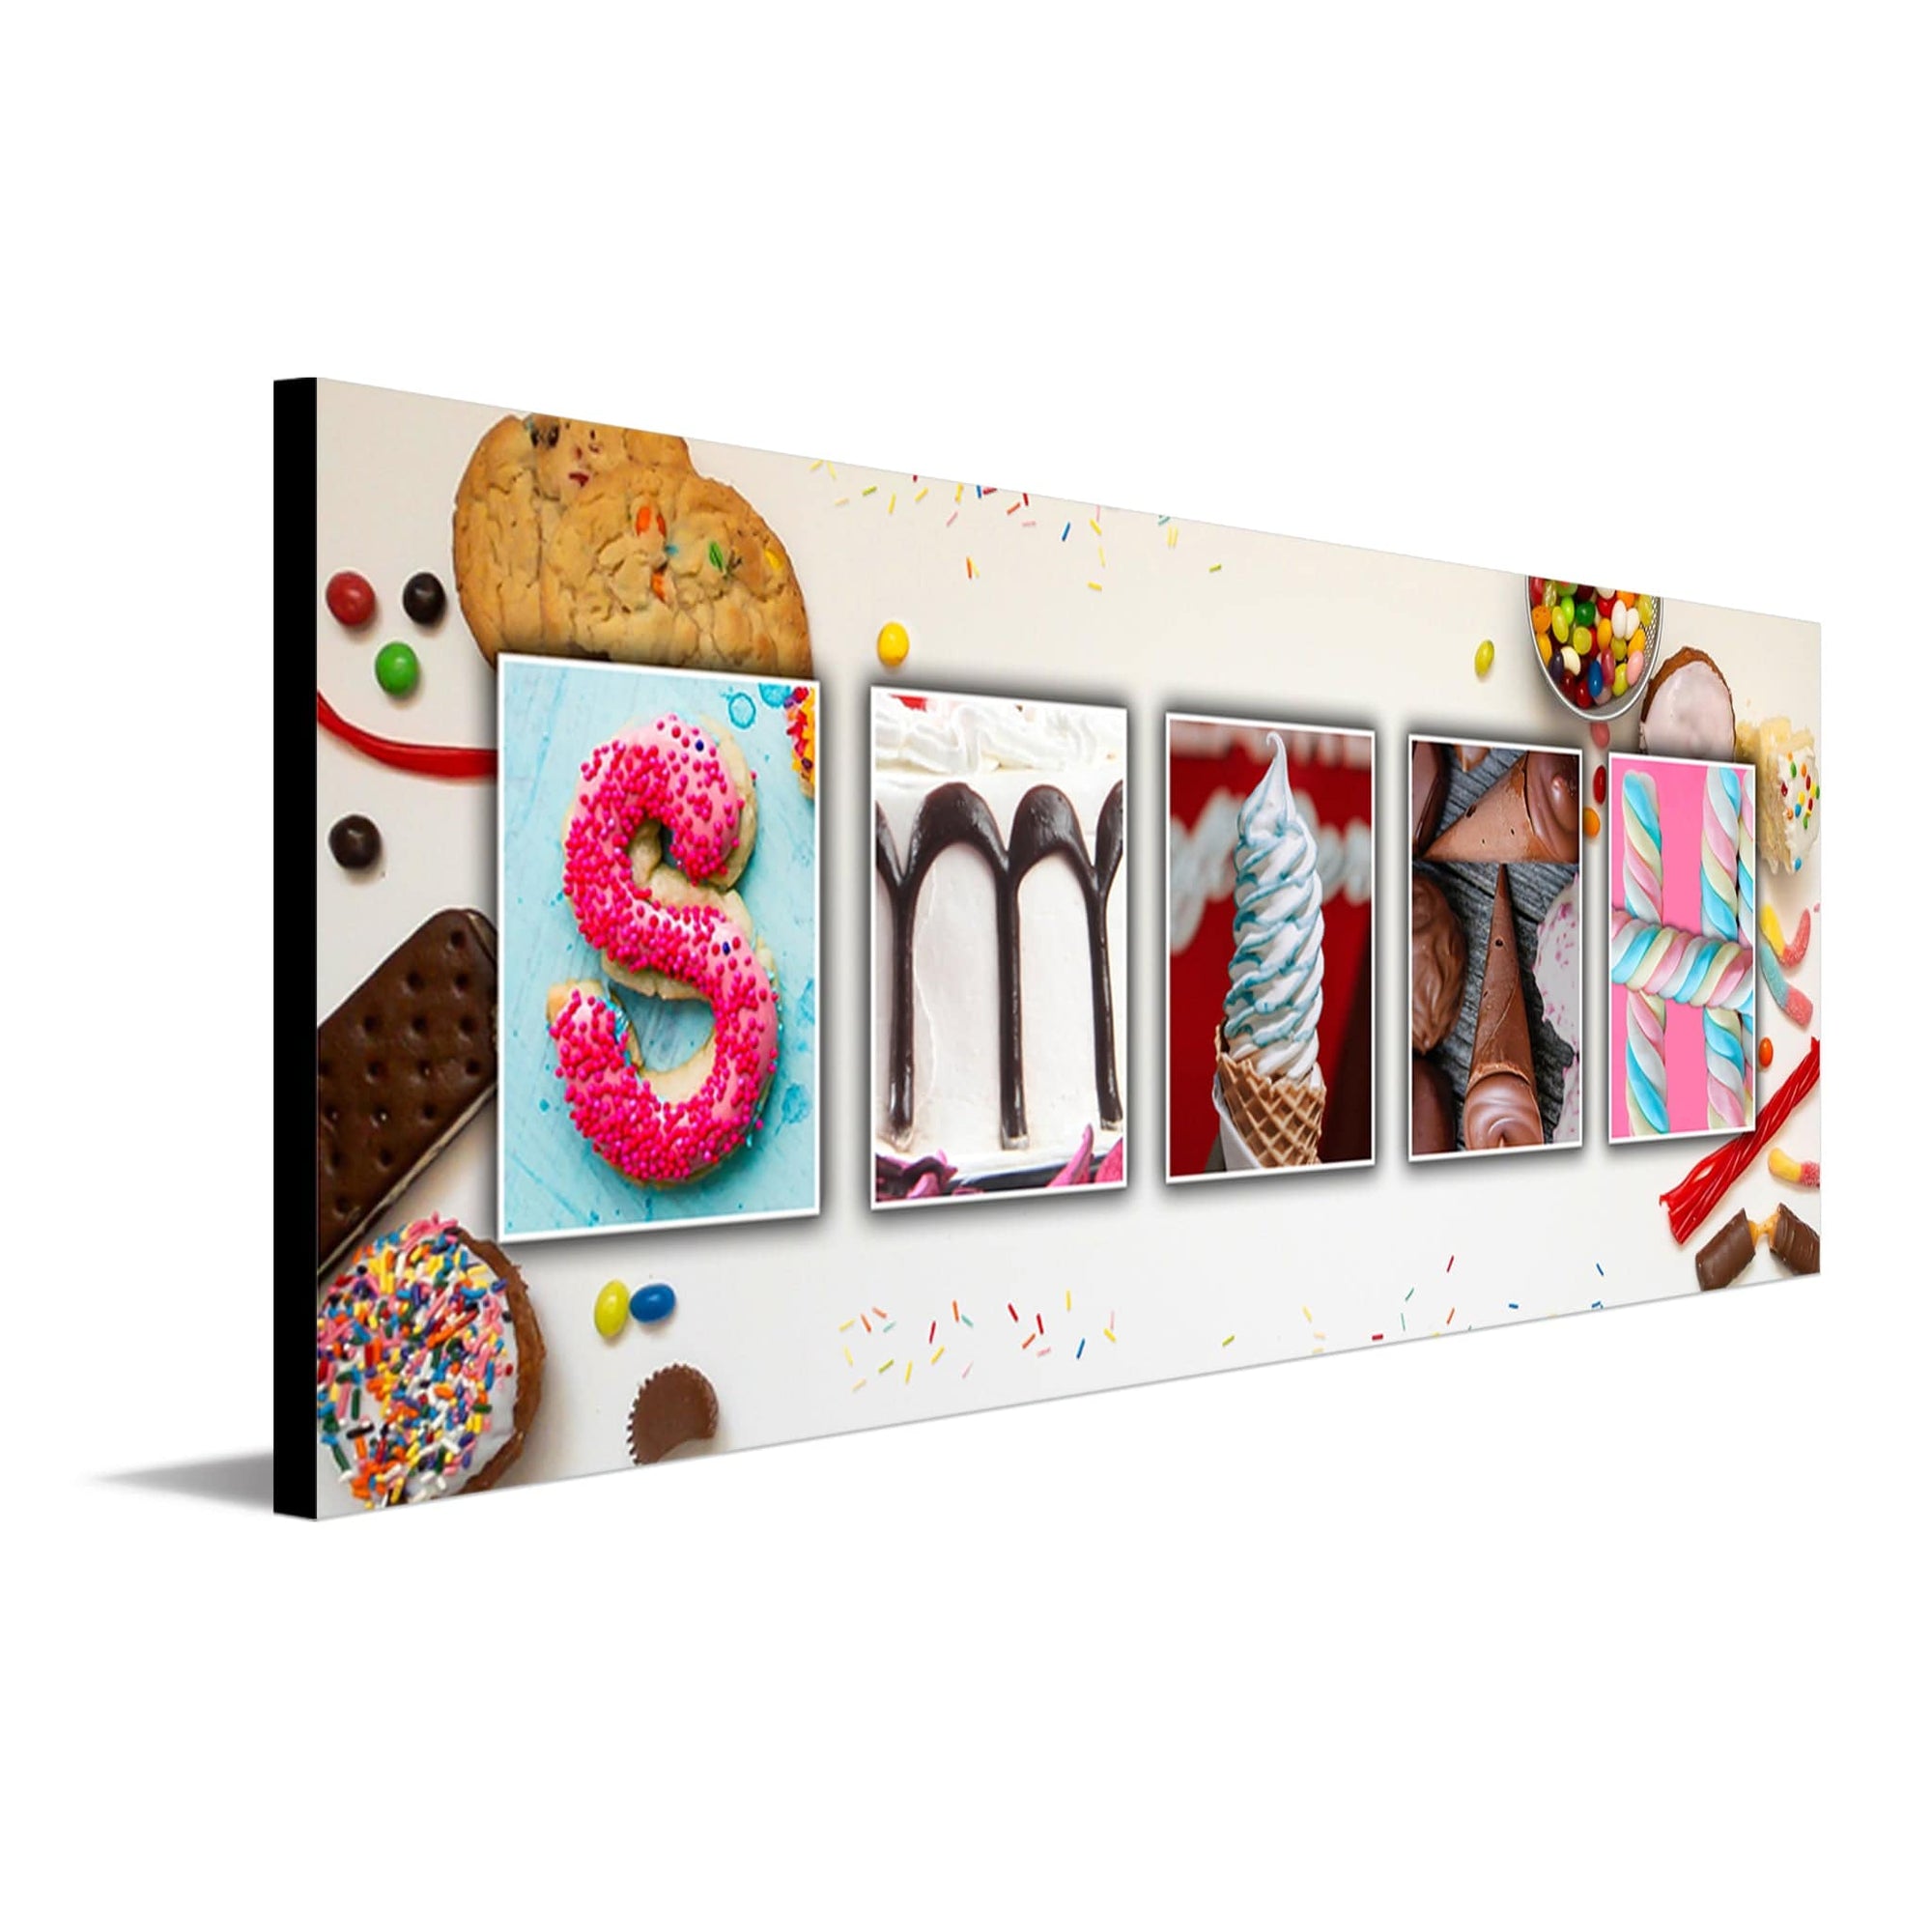 Personal-Prints Sweets/Candy Name Art.